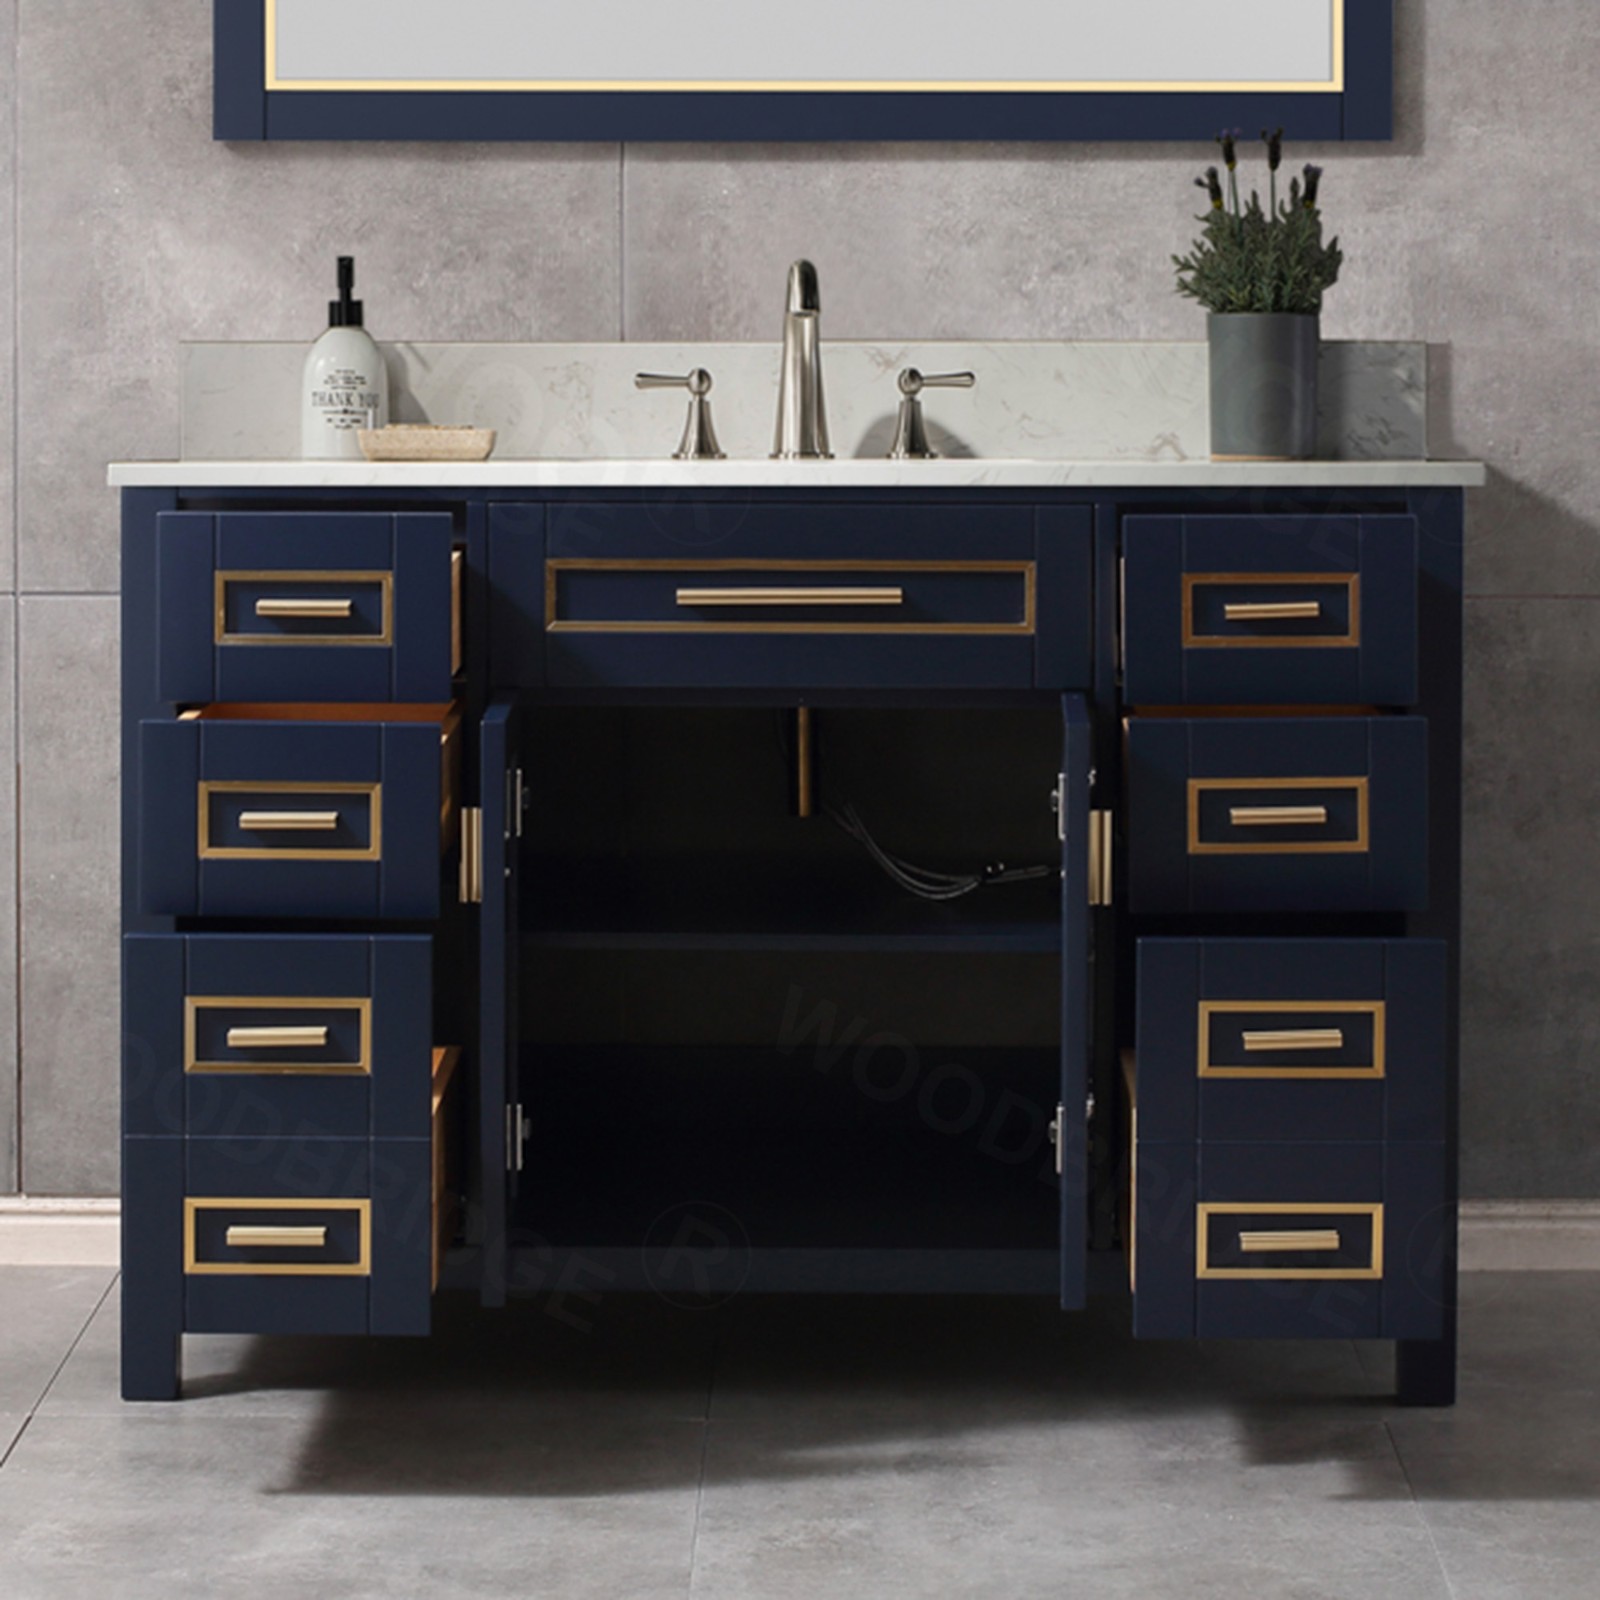  WOODBRIDGE Milan  49” Floor Mounted Single Basin Vanity Set with Solid Wood Cabinet in Navy Blue and Engineered stone composite Vanity Top in Carrara White with Pre-installed Undermount Rectangle Bathroom Sink and Pre-Drilled 3-Hole for 8-inch Widespread_4749